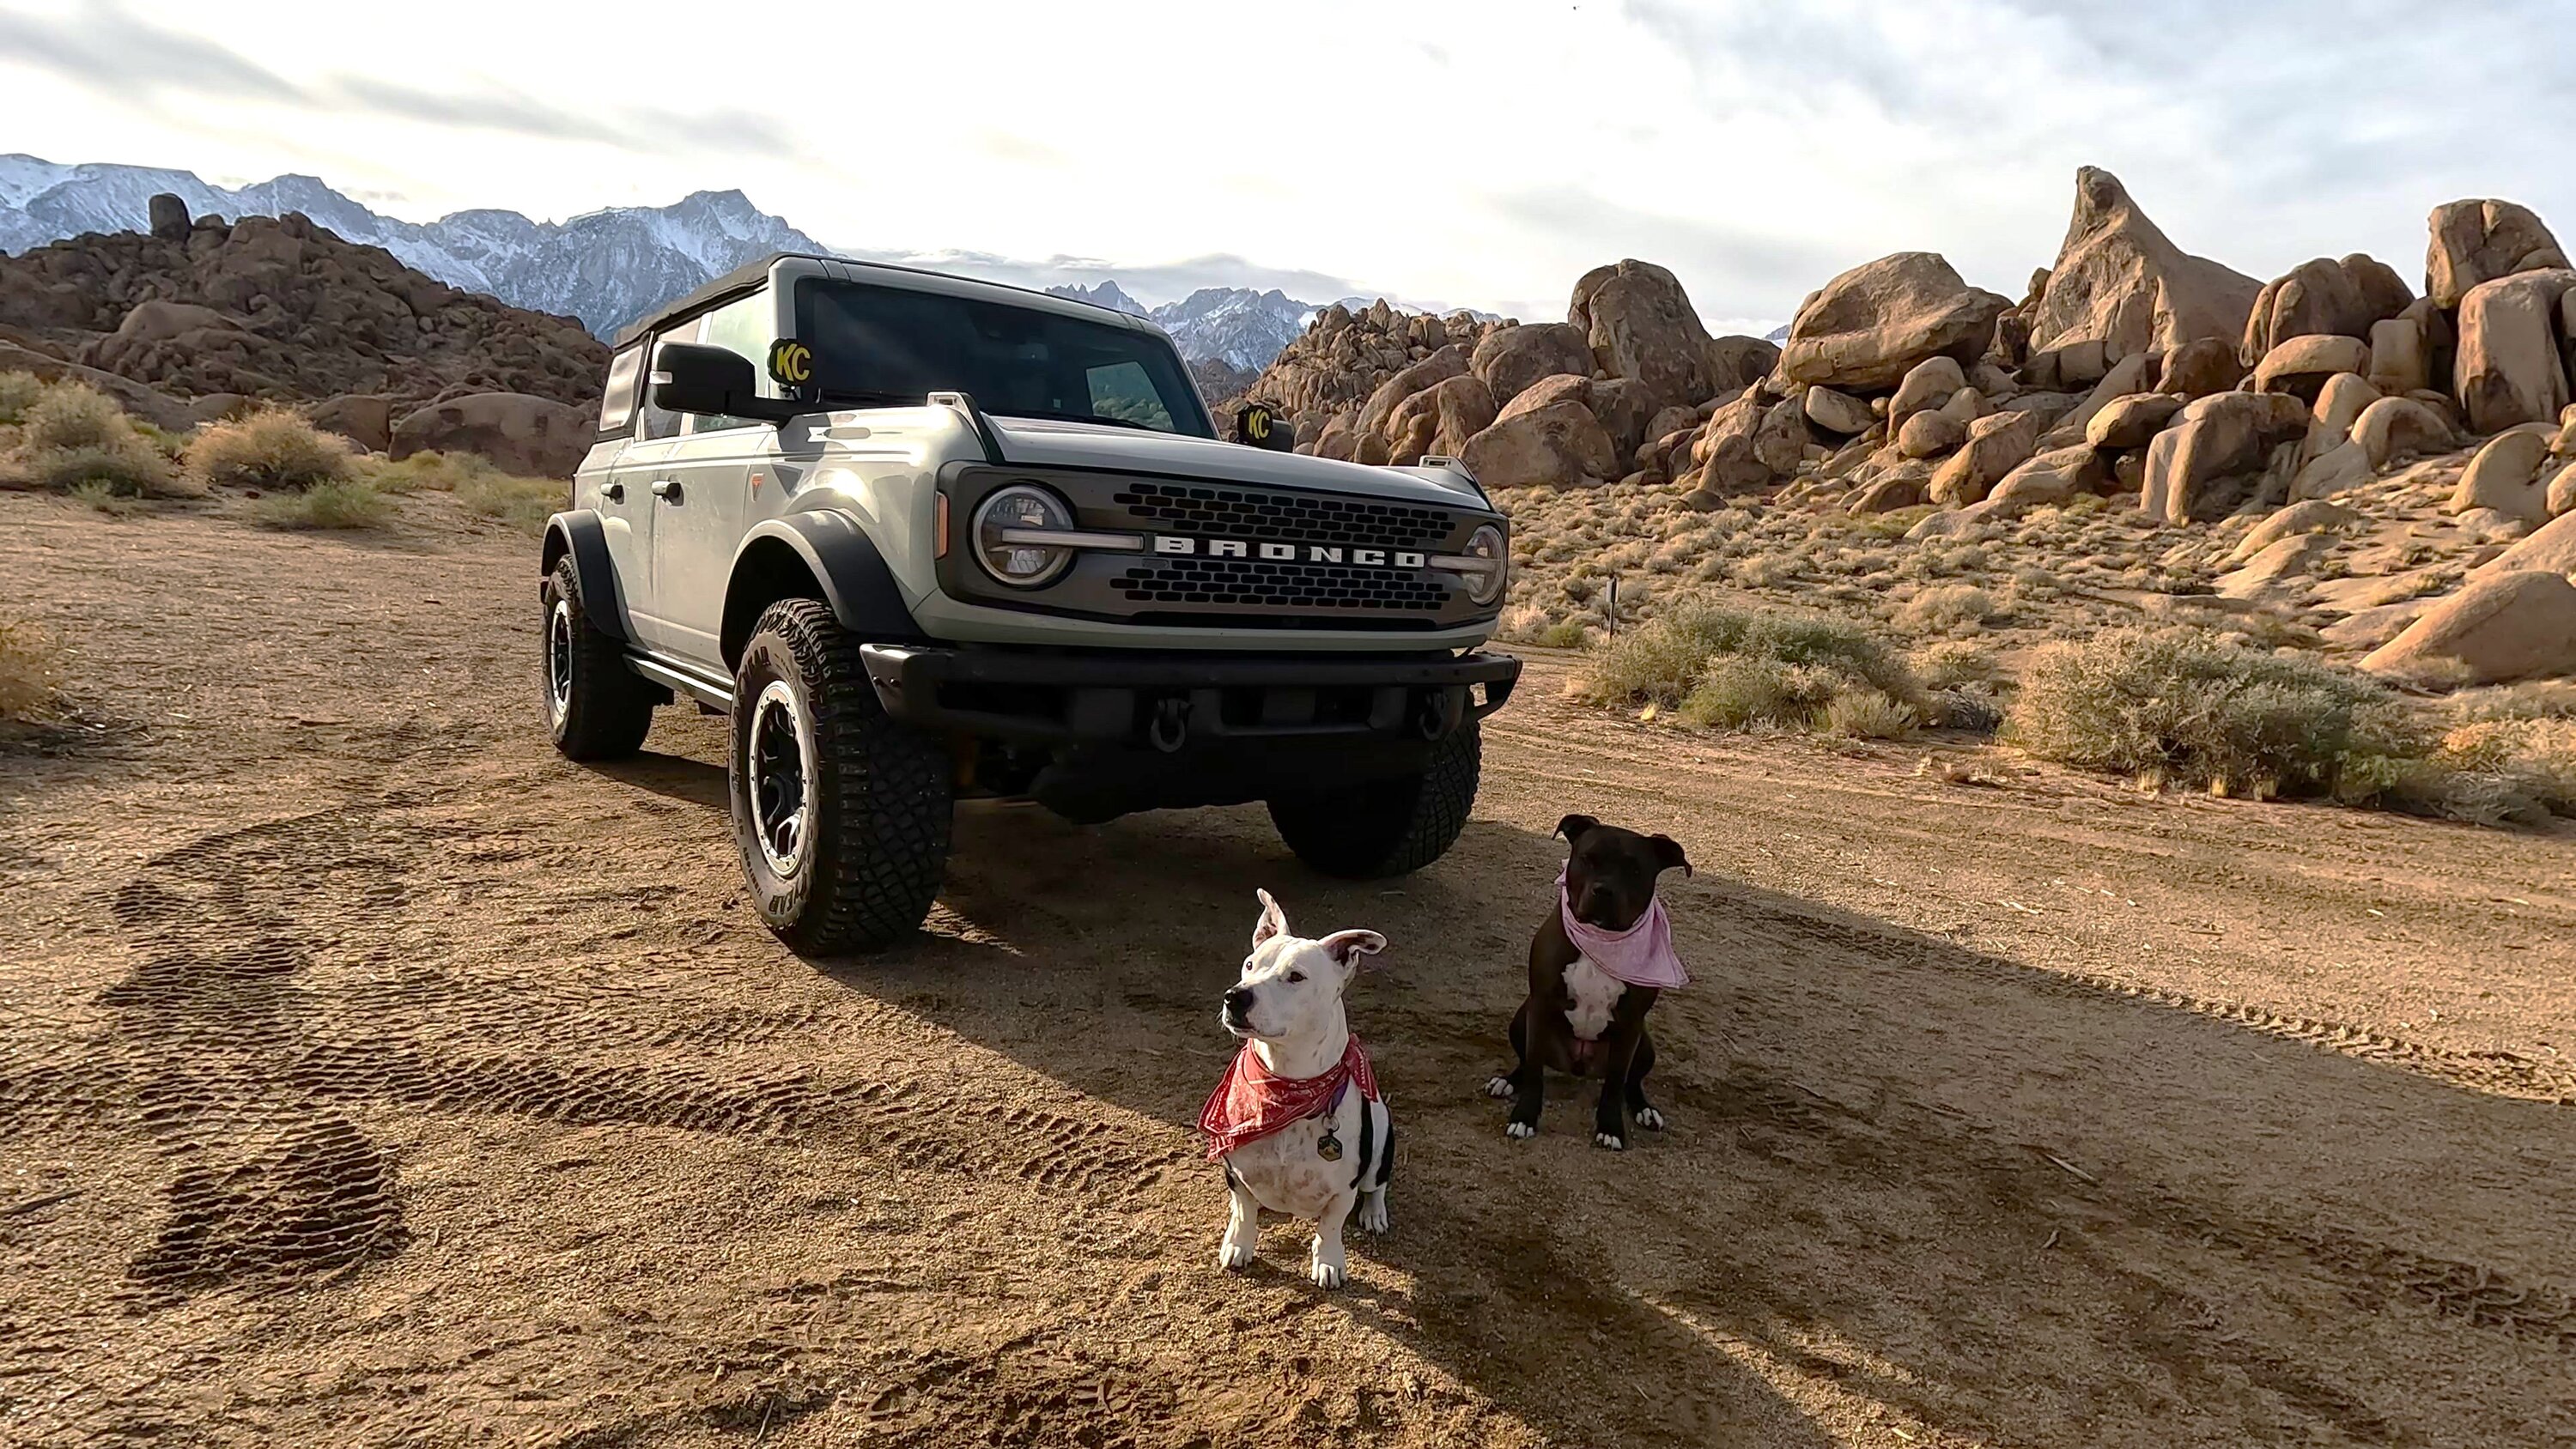 Ford Bronco Finding an EPIC campsite and sleeping in the back of the Bronco - Alabama Hills [pics and video] 1_dogsandbronco